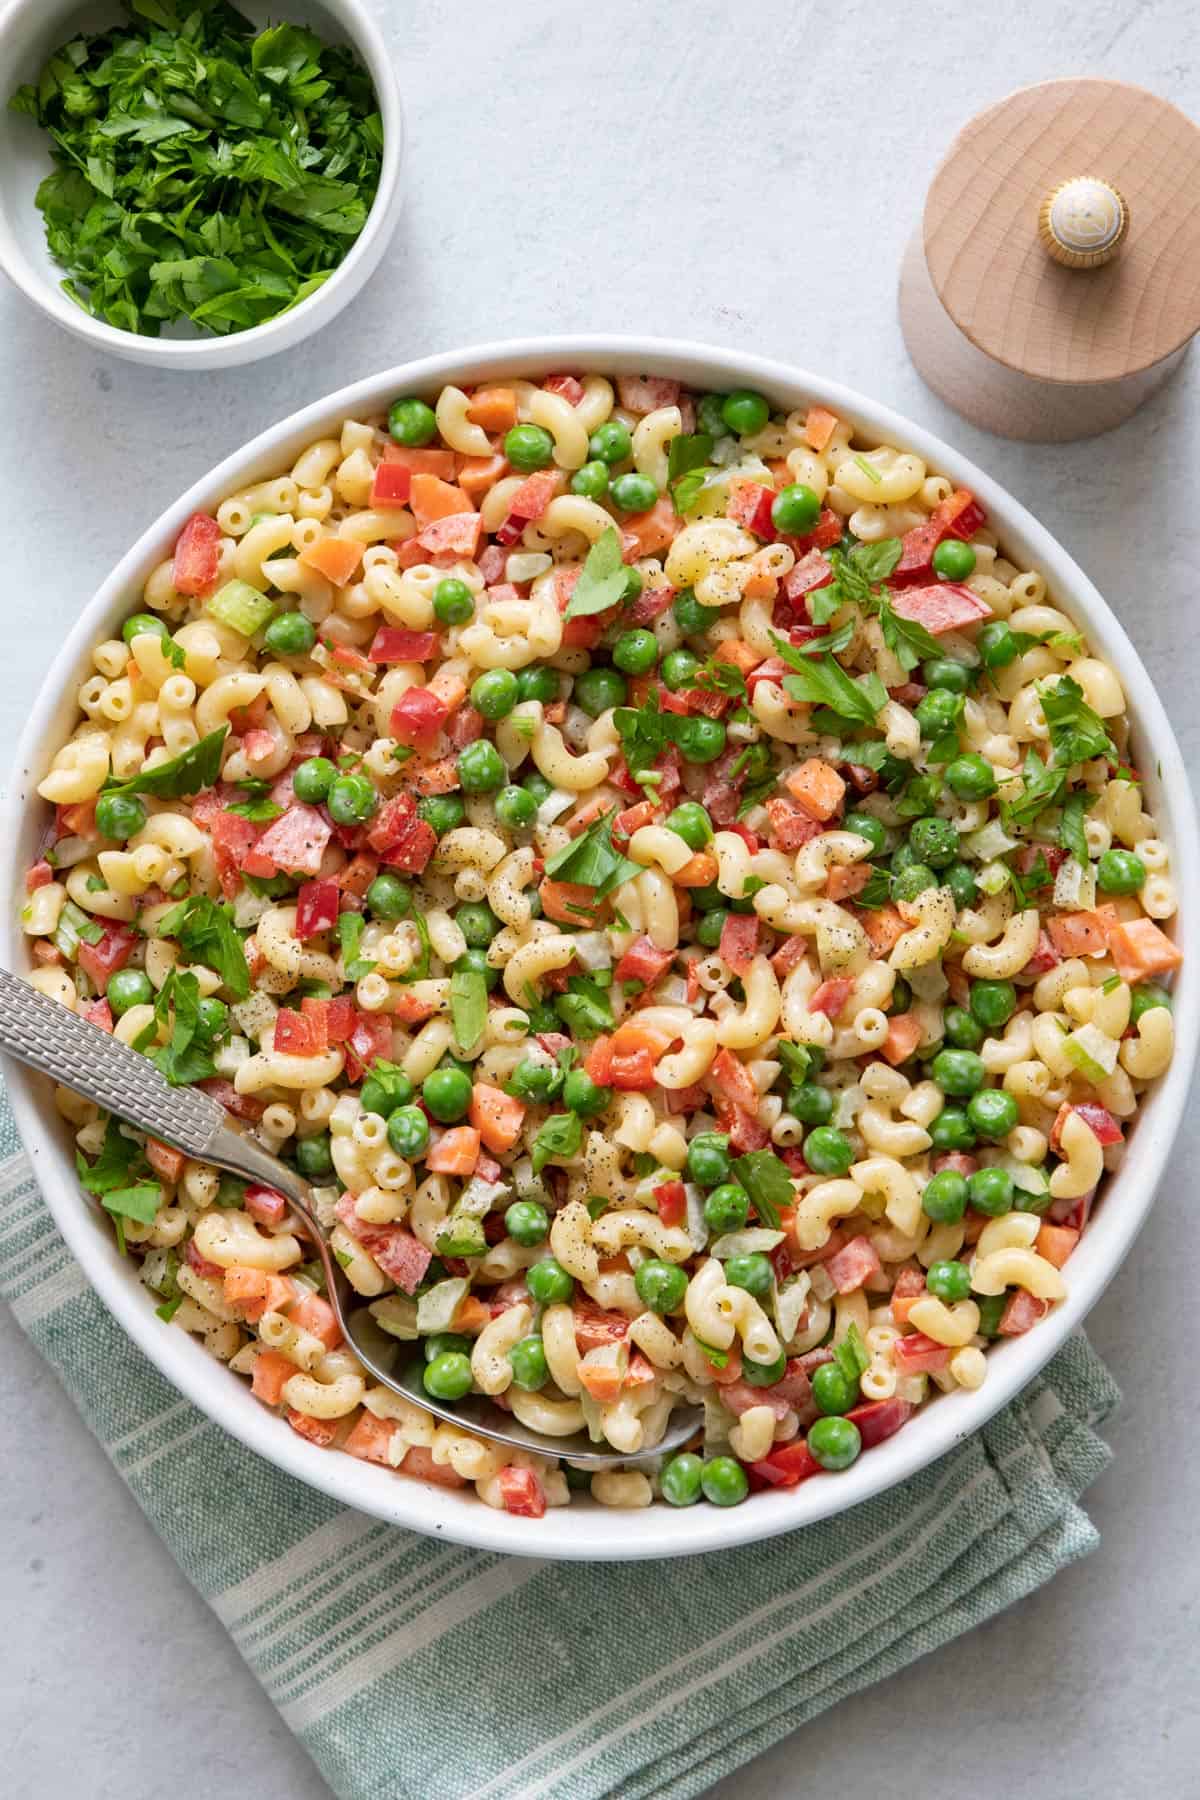 Large bowl of vegan macaroni salad with pasta, peas, carrots, celery, red bell pepper, tossed in dressing.